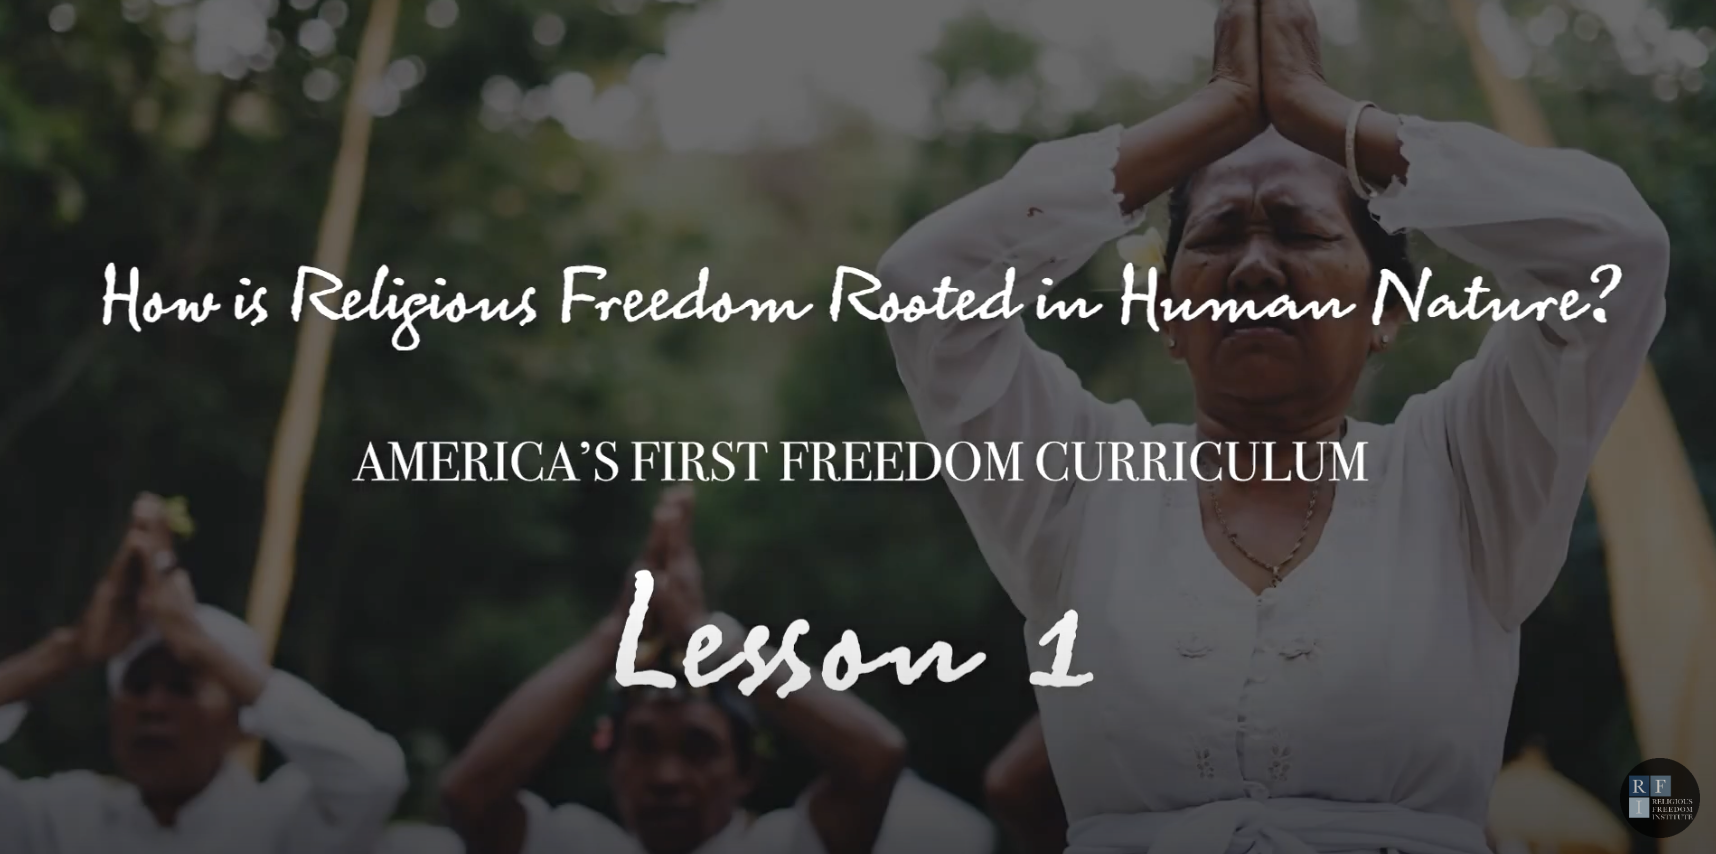 Featured image for “America’s First Freedom Curriculum Series | Video 3”